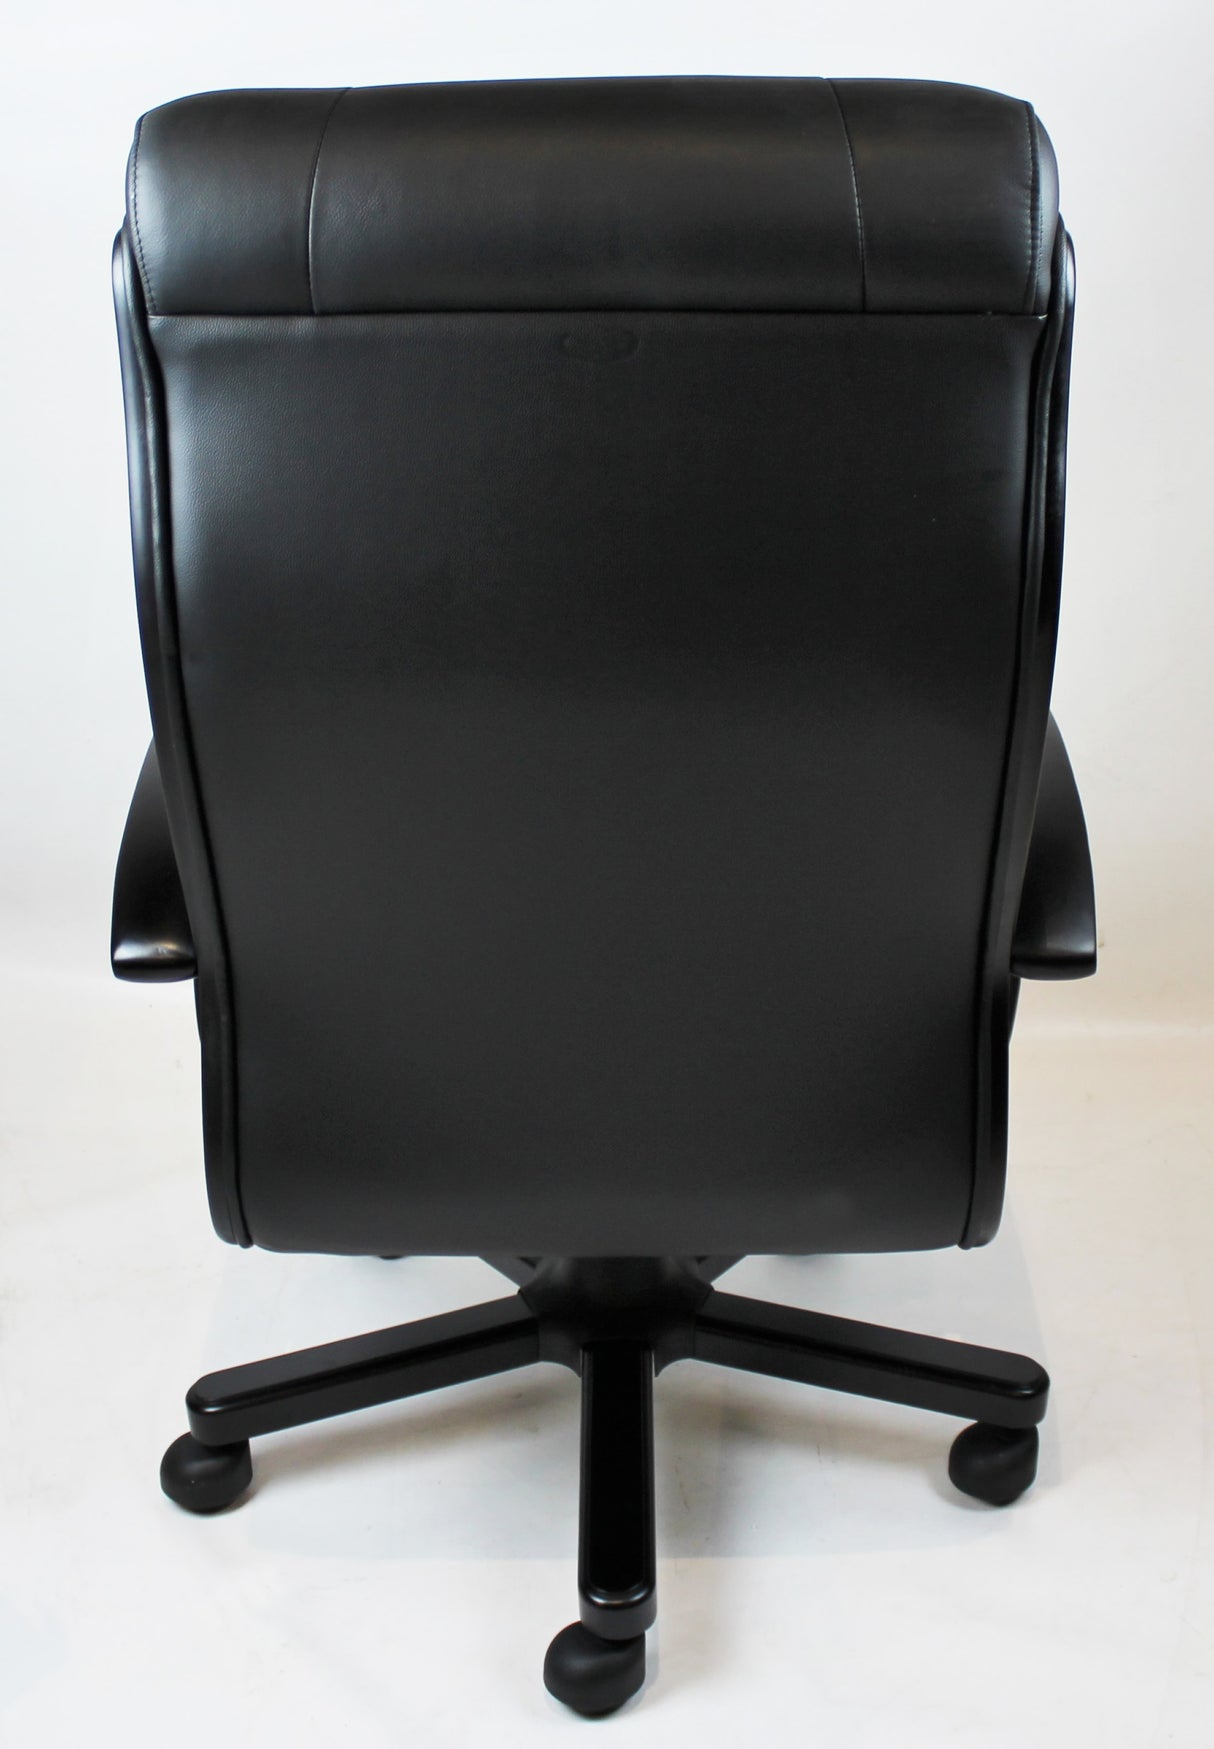 Executive Black Leather Office Chair with Black Arms - F01A